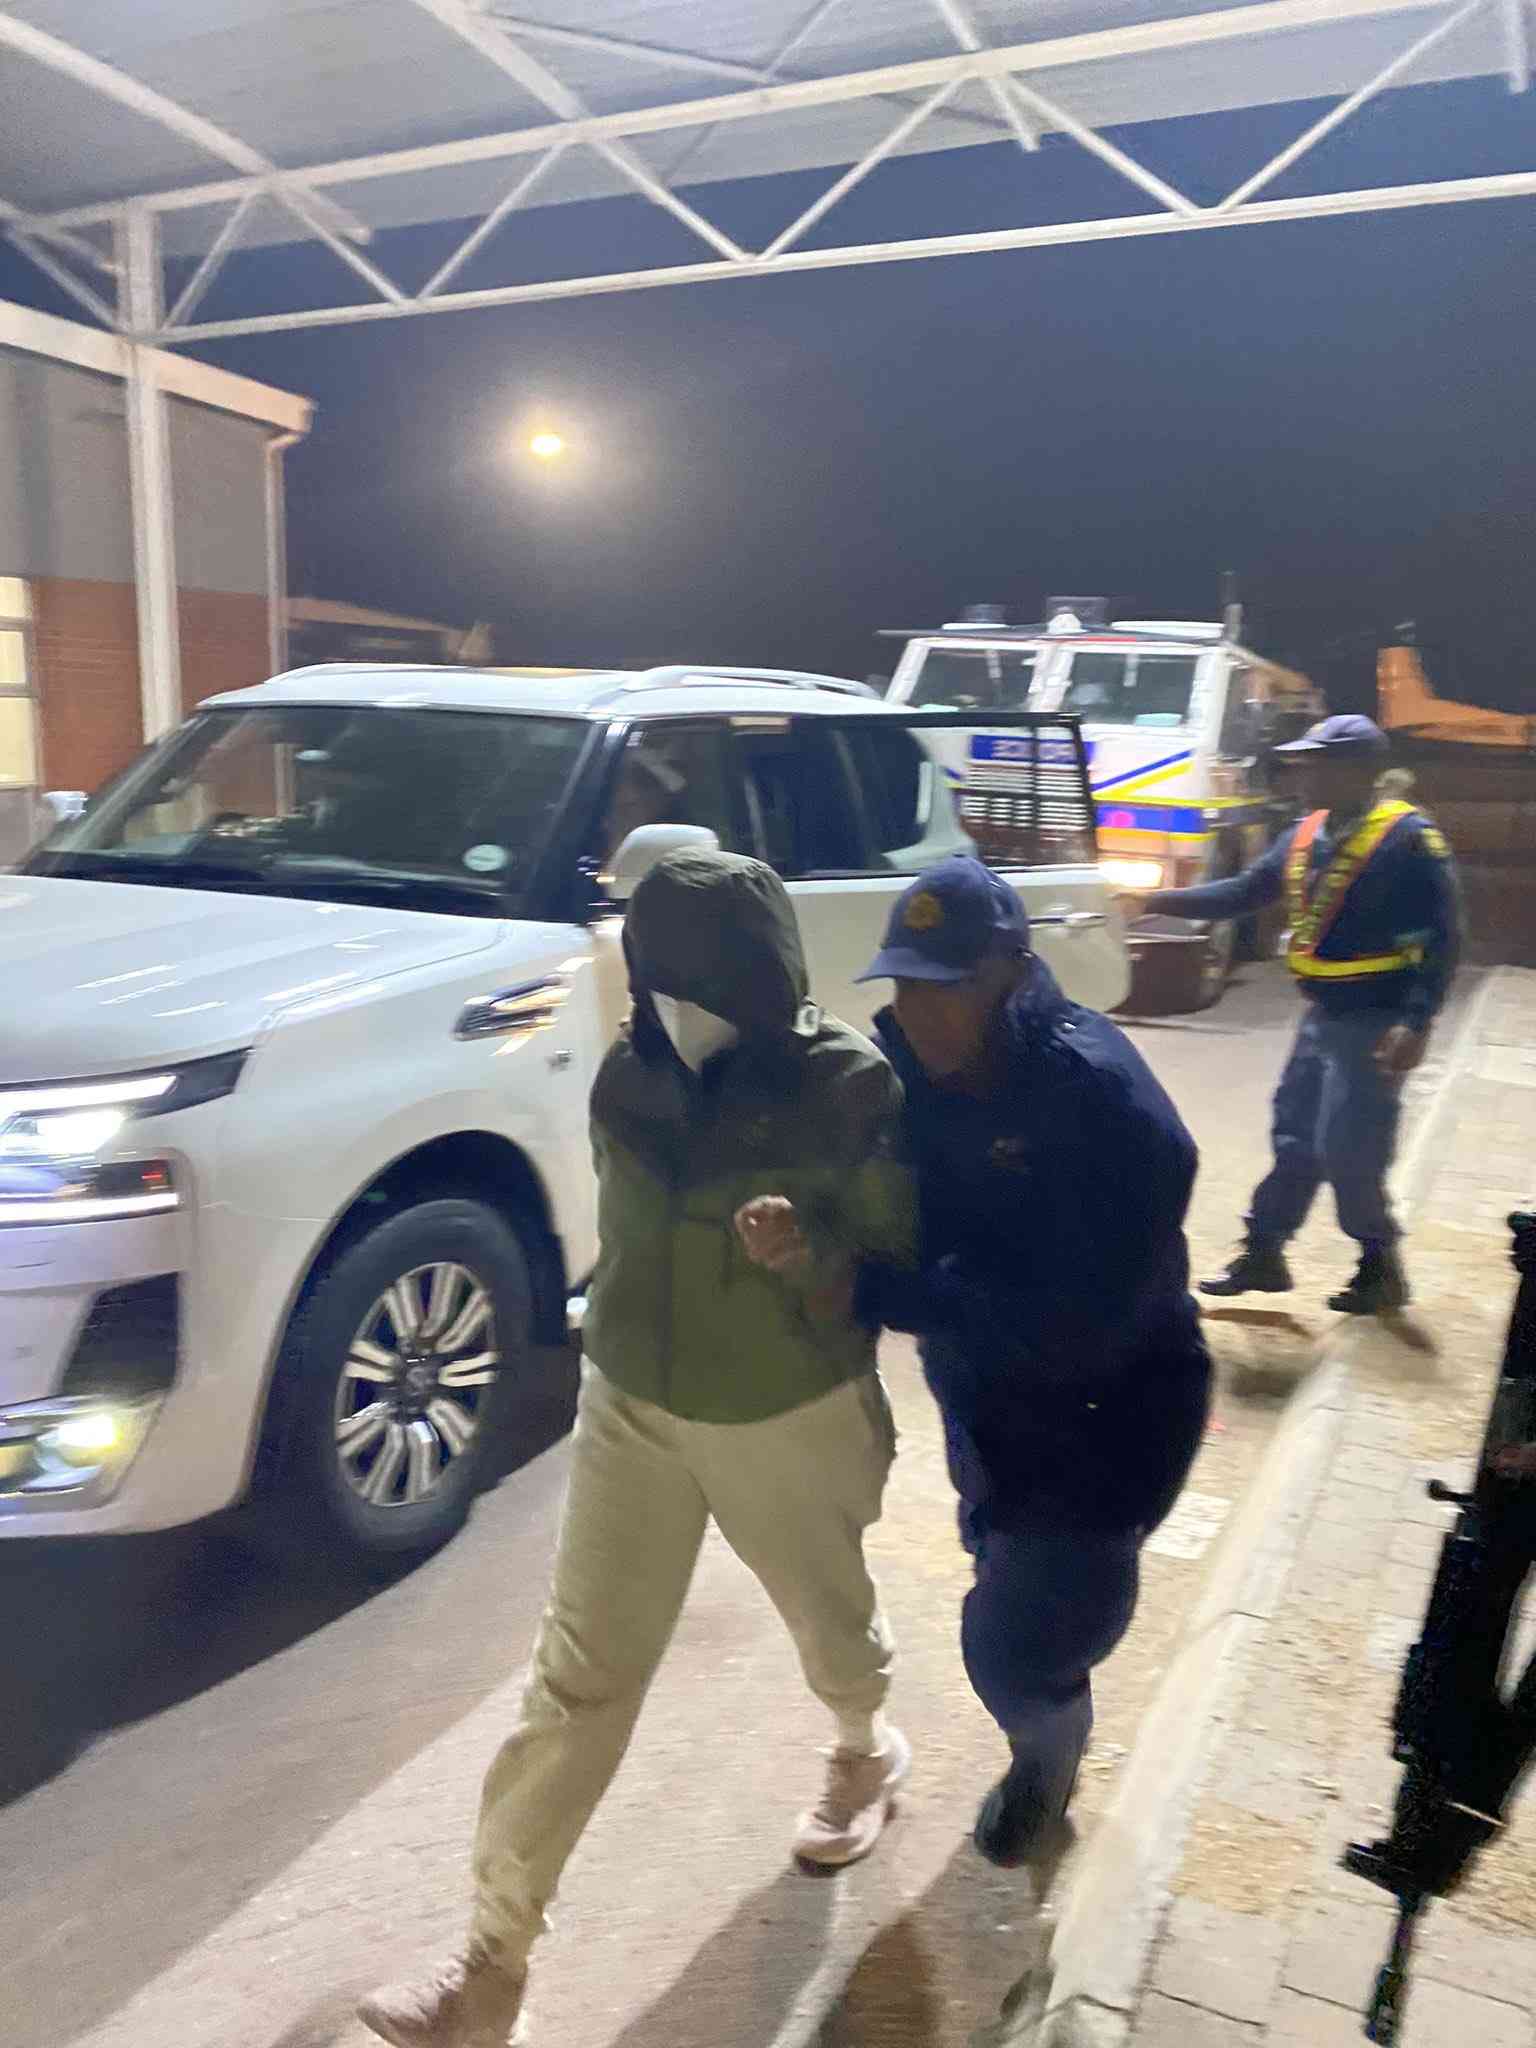 Dr Nandipha & Thabo Bester Arrested In South Africa After Arriving from Tanzania – Amapiano MP3 Download